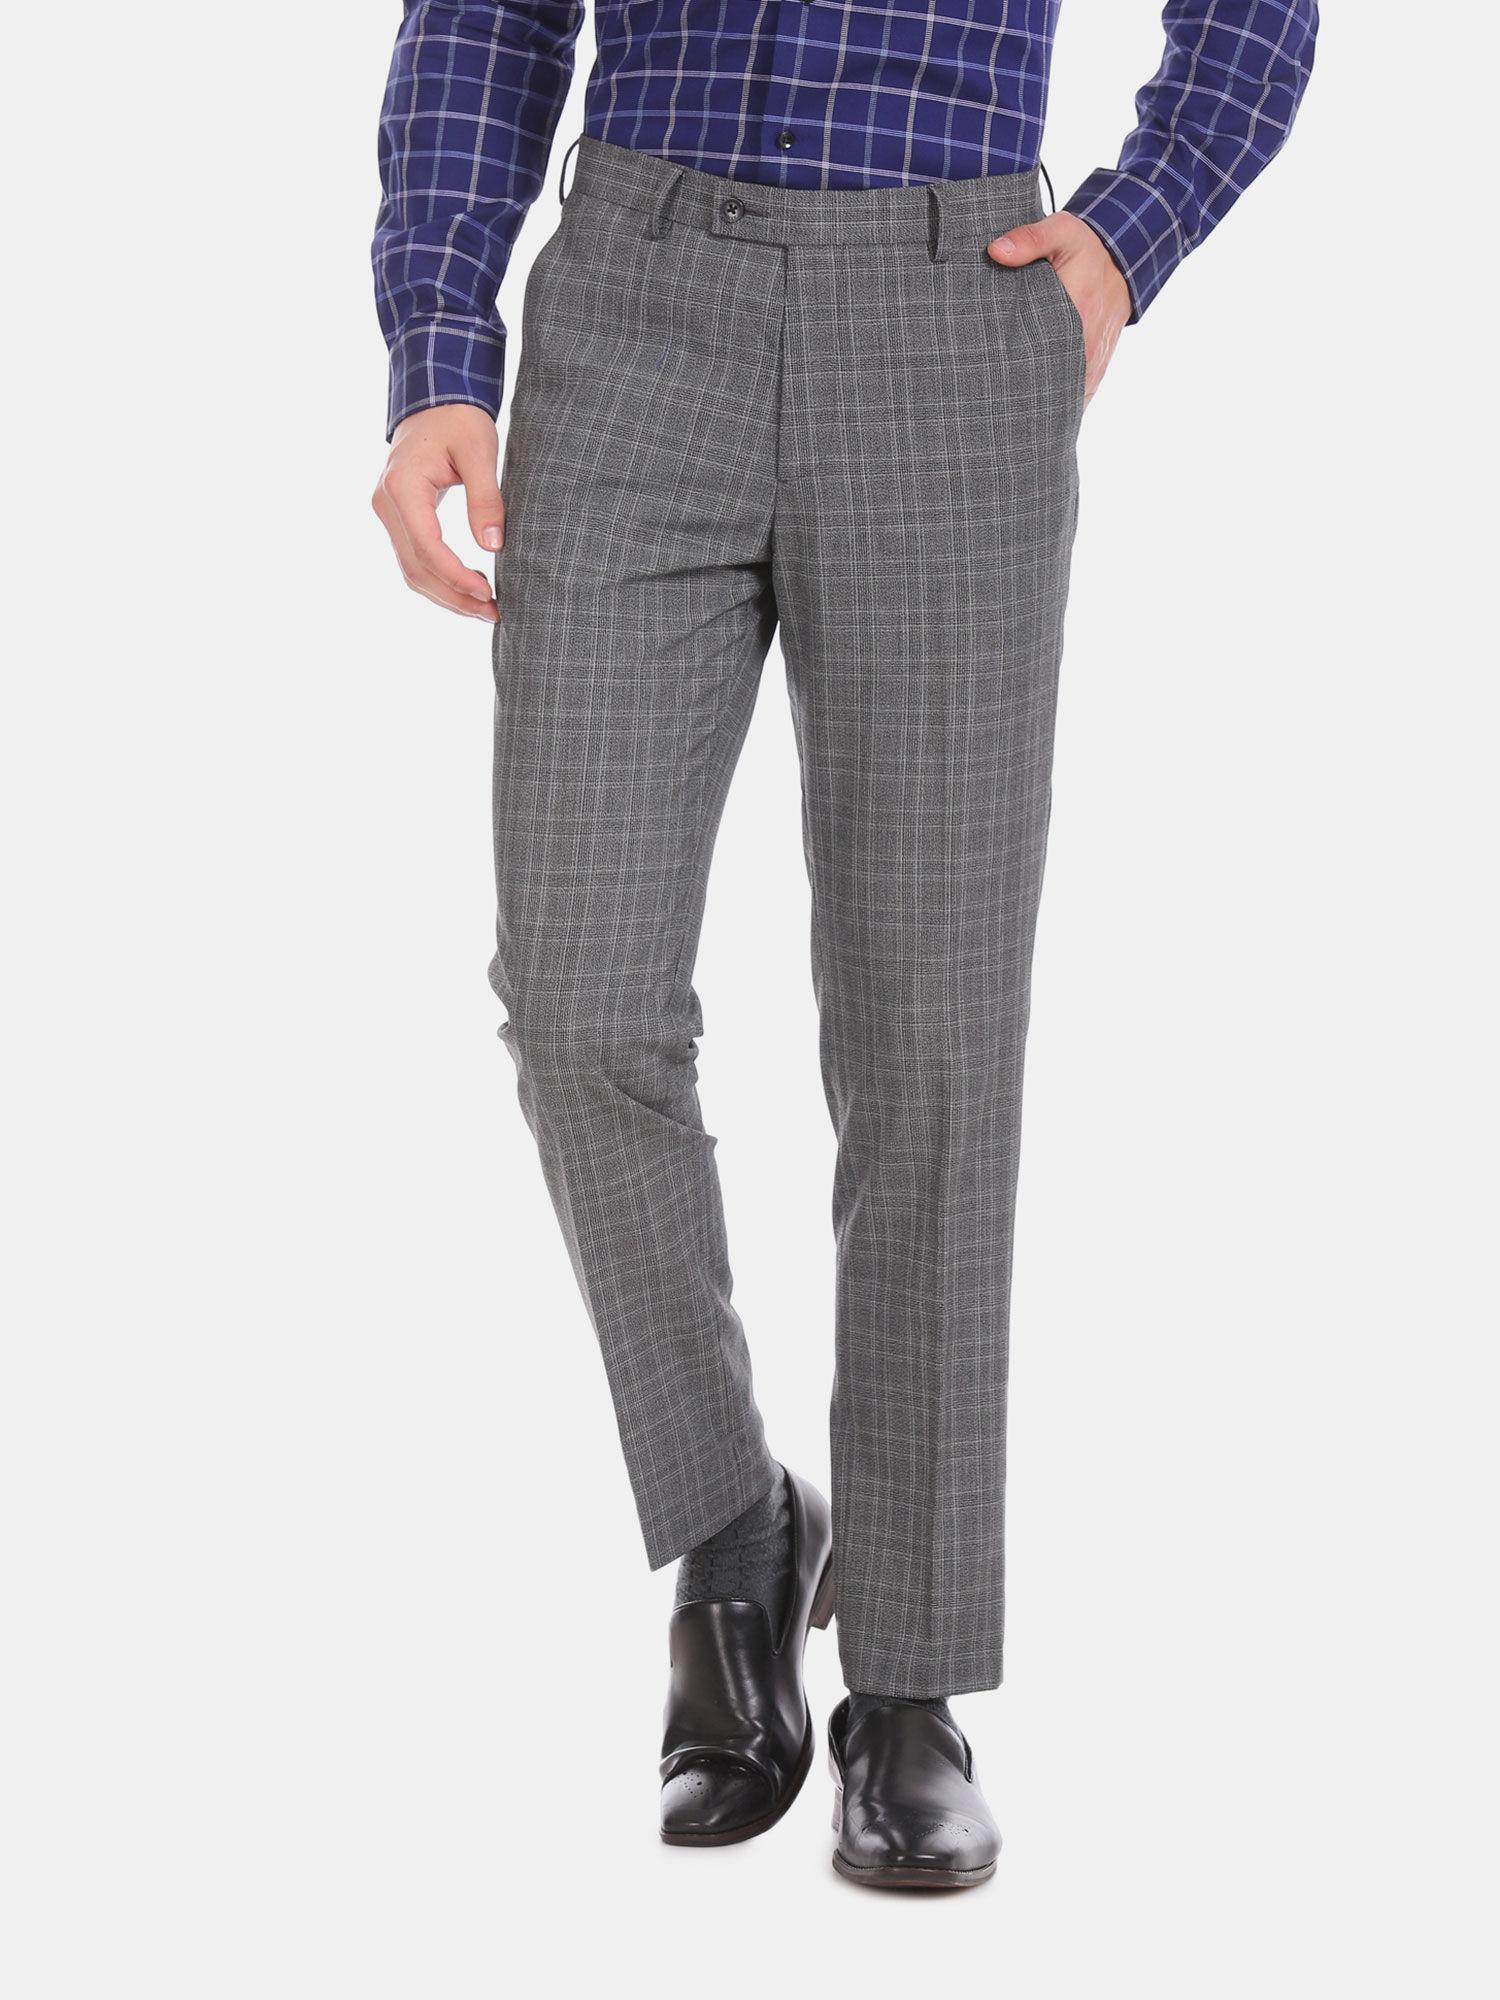 men-grey-slim-fit-patterned-check-formal-trousers